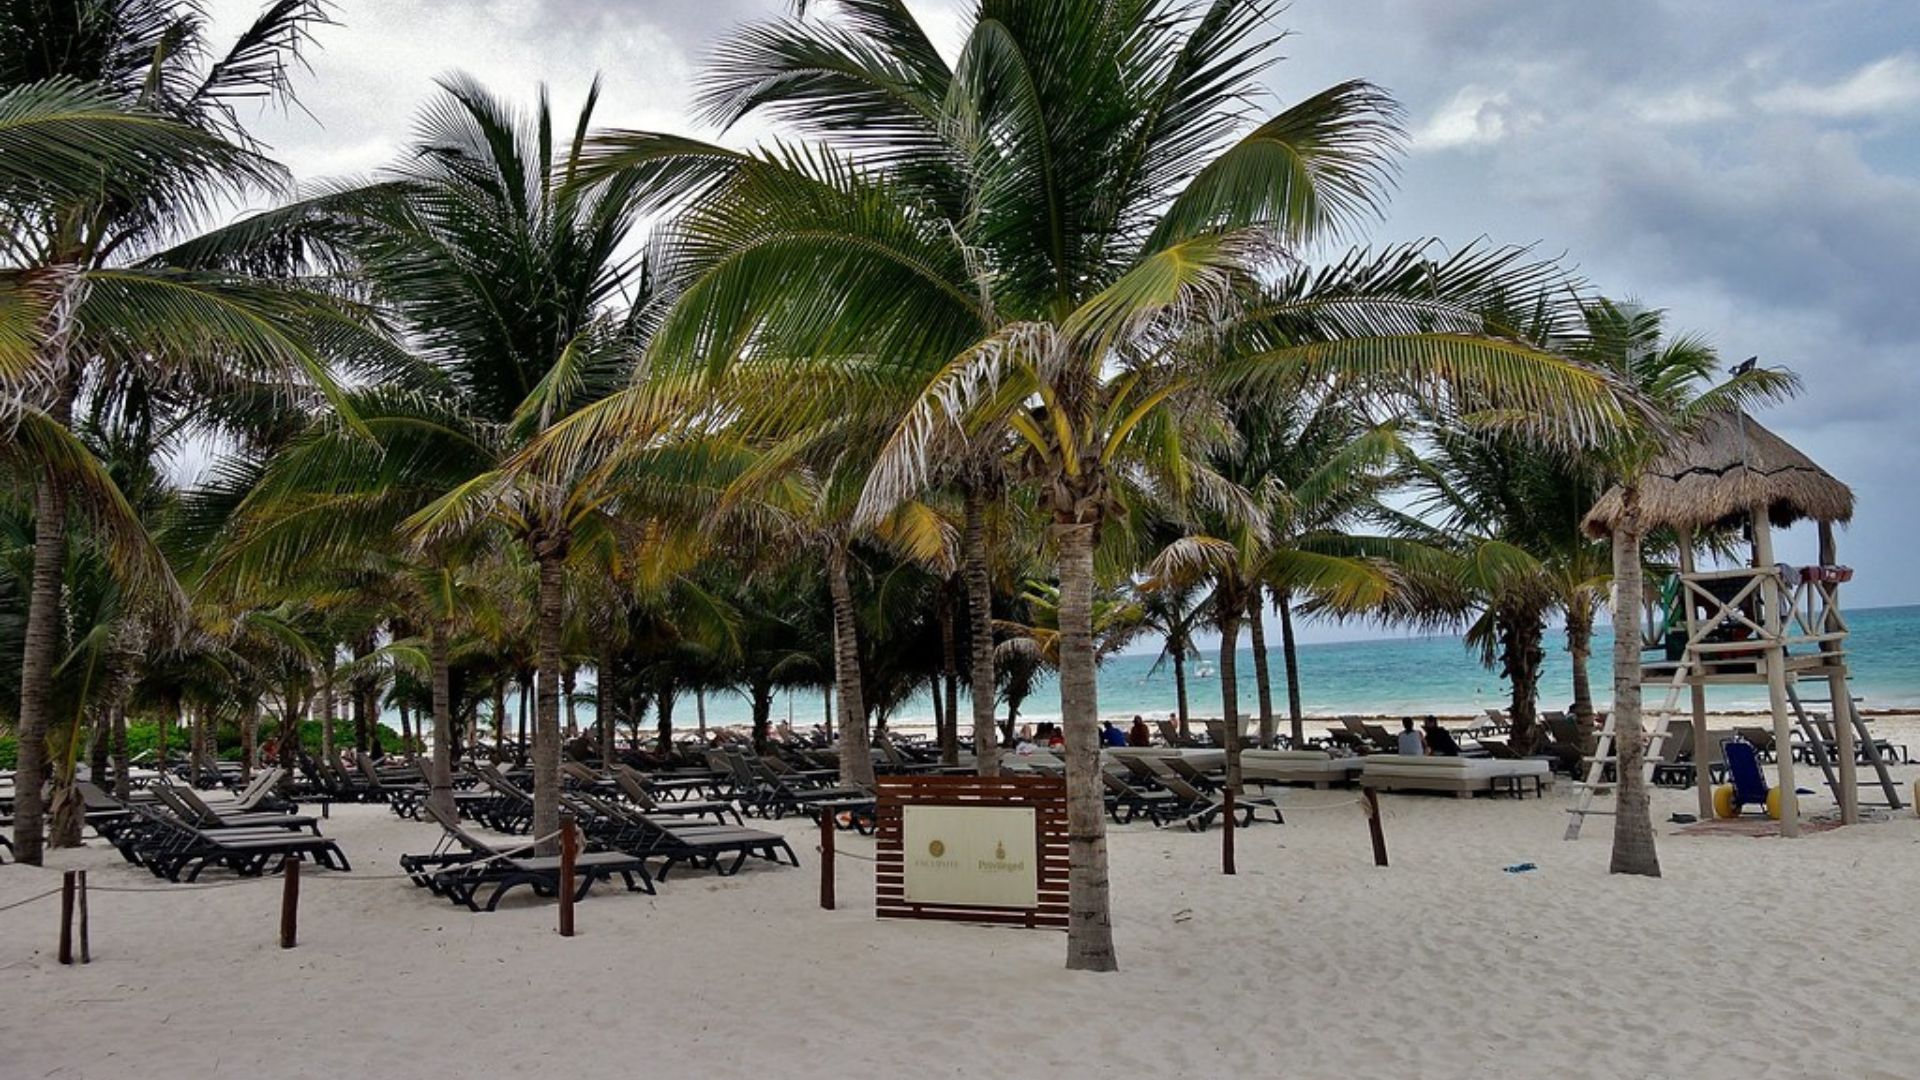 palm trees and lounge chairs on Maroma beach